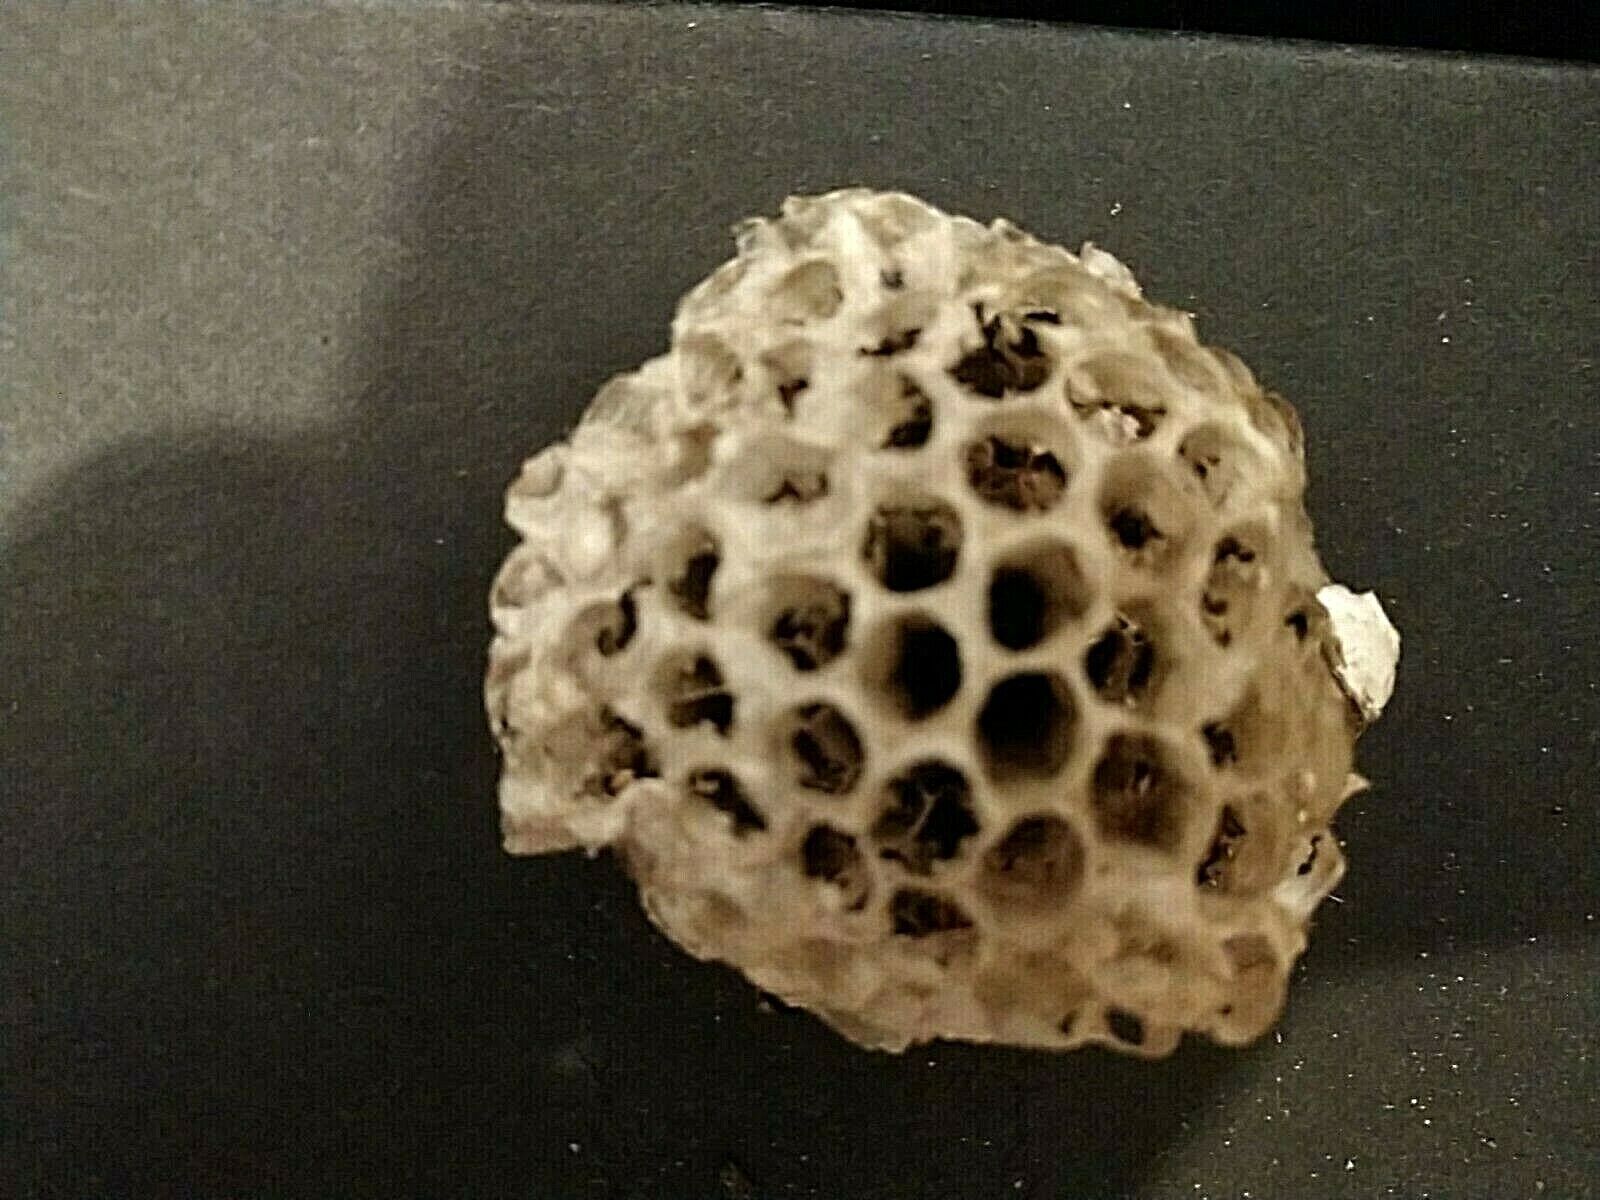 WASP NEST ABANDONED EMPTY NATURAL NATURE FINDS SMALL MADE IN SOUTH TEXAS